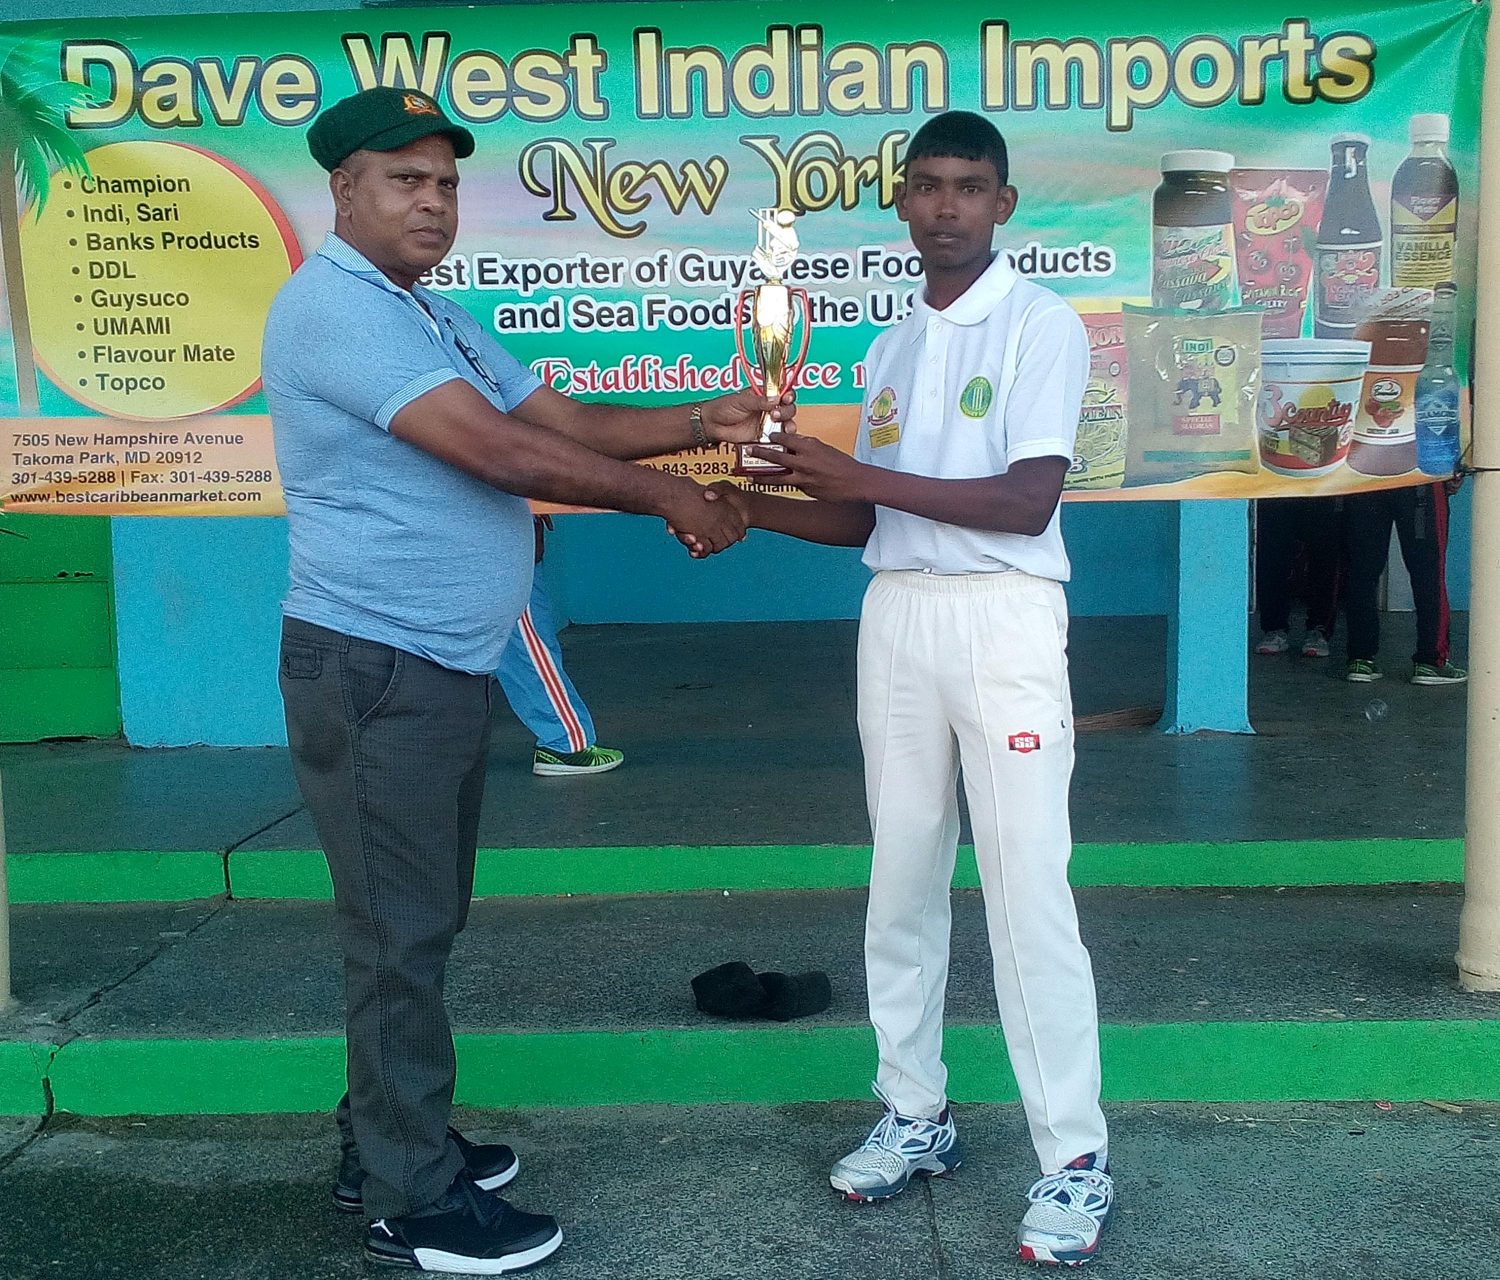 Man of the Match Romel Datterdeen receives his award from match referee Moses Roopnarine